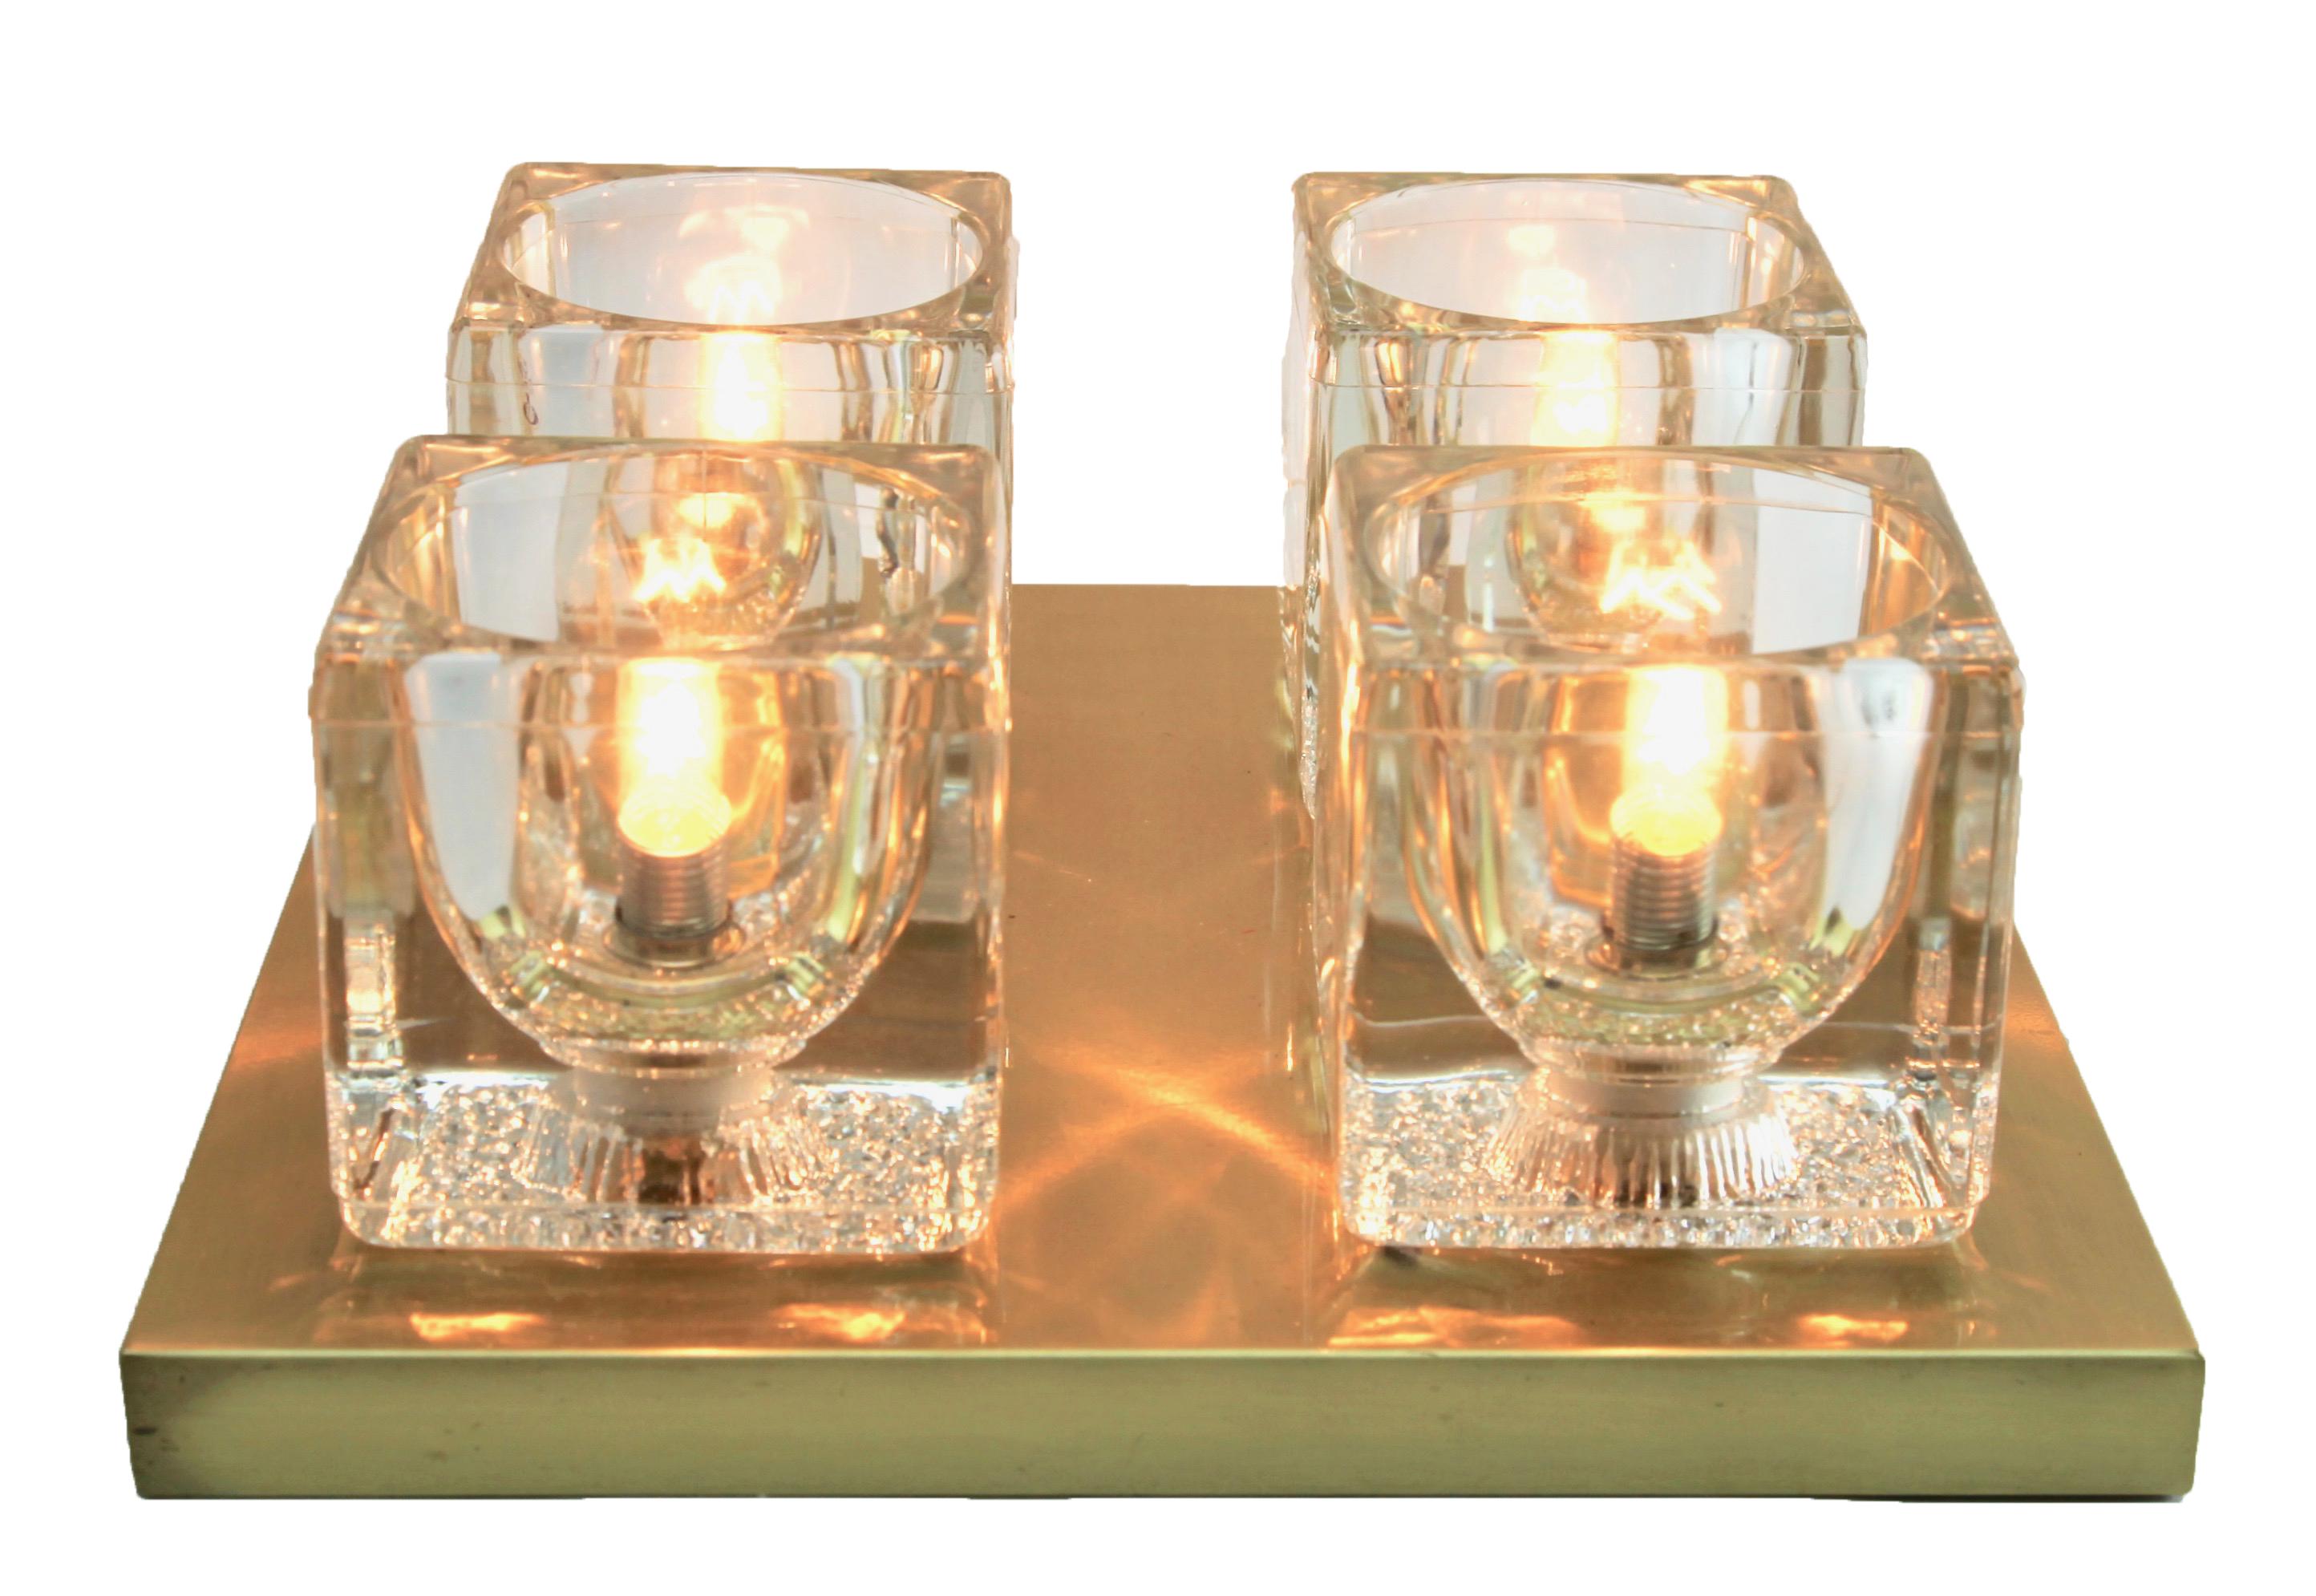 Midcentury set of 3 modernist German 1970s ice glass cube wall sconce by Peill & Putzler

Mid-Century Modernist German 1970s lamps were designed by Peill & Putzler. With brass fittings
The screw fittings which connect the brass and ice glass